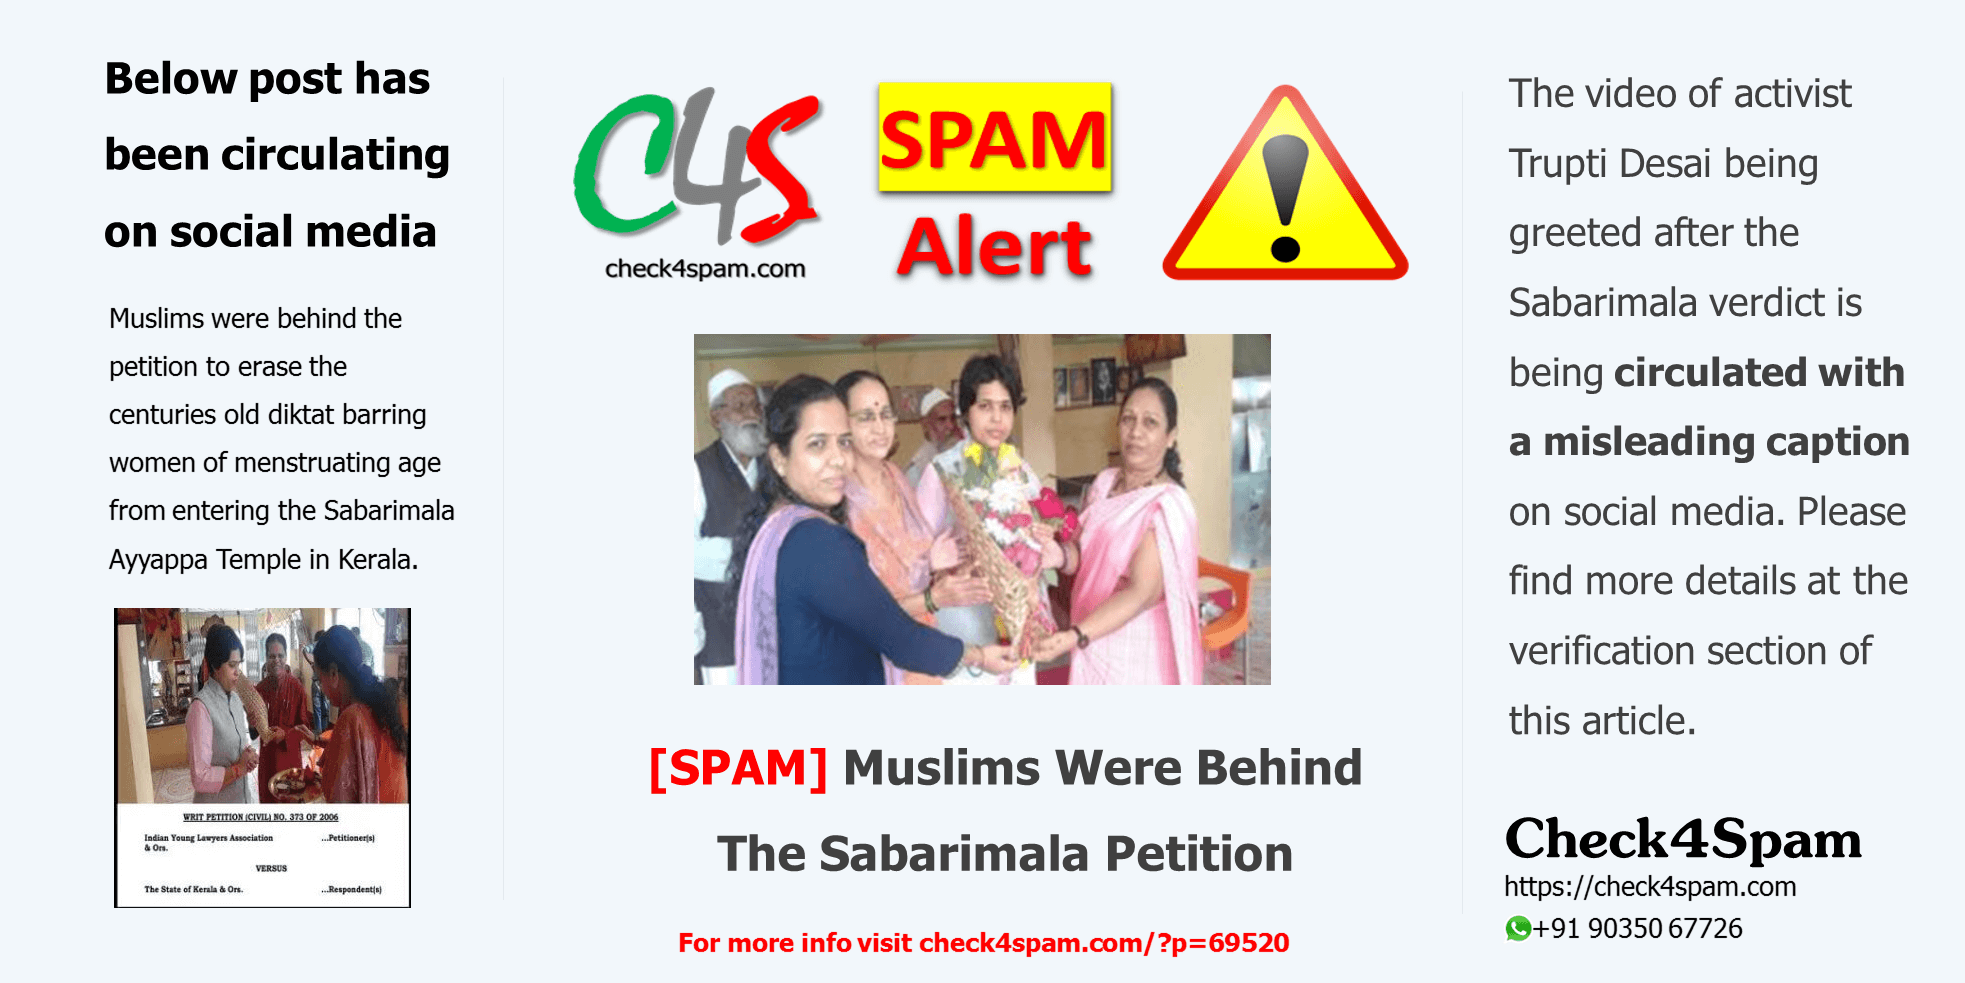 [SPAM] Muslims Were Behind The Sabarimala Petition